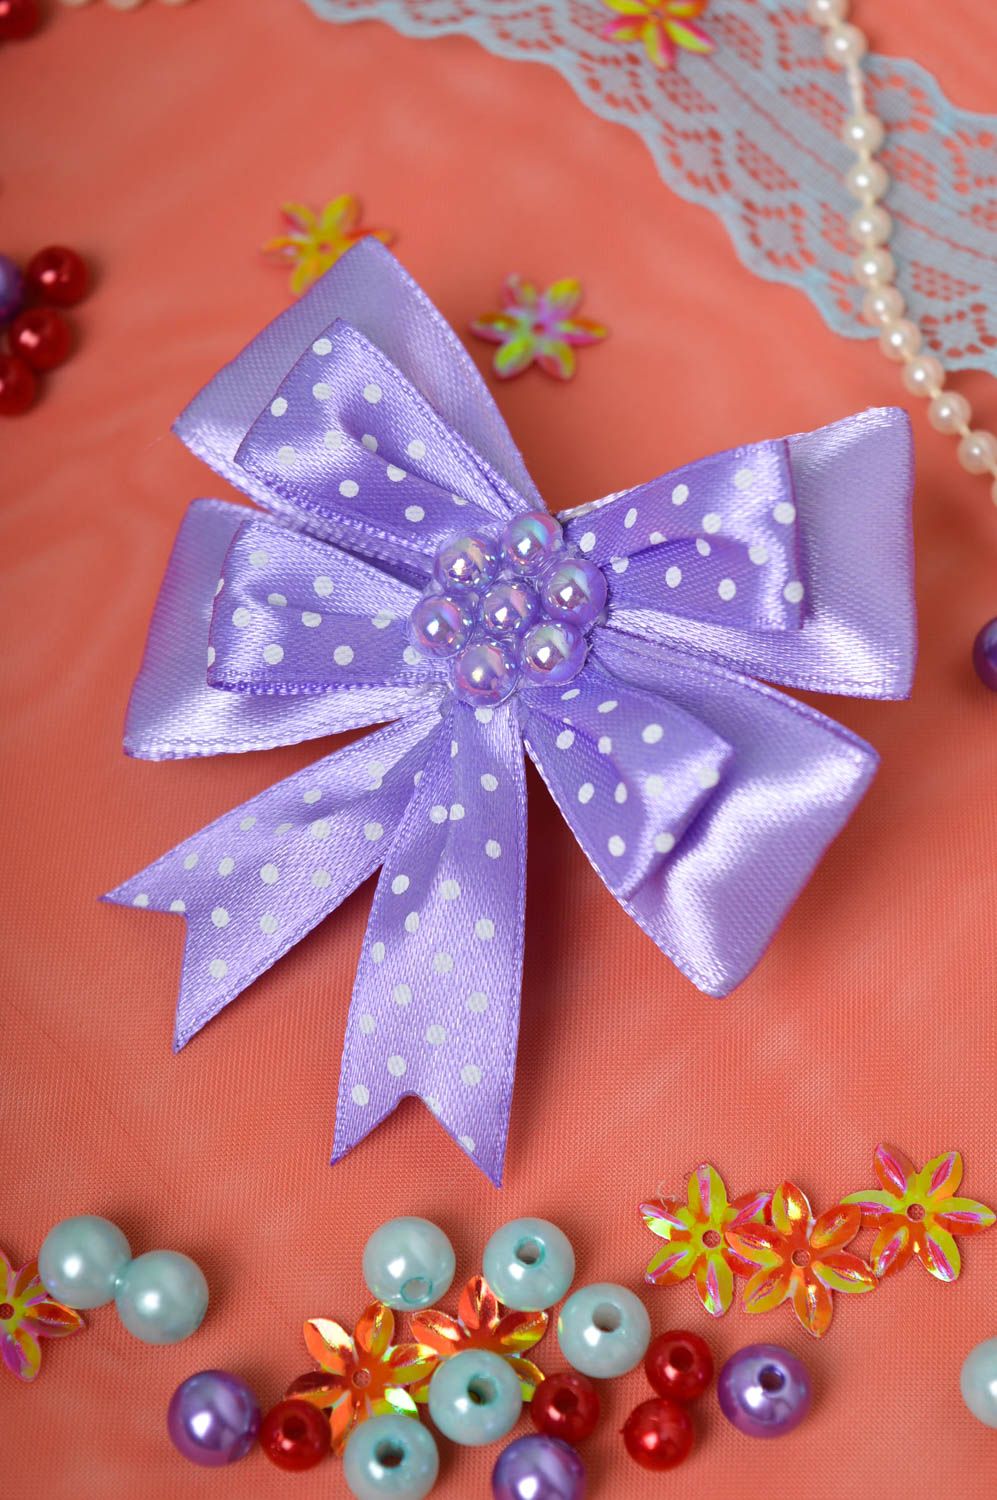 Handmade bow scrunchy delicate hair accessories for kids kanzashi jewelry photo 1